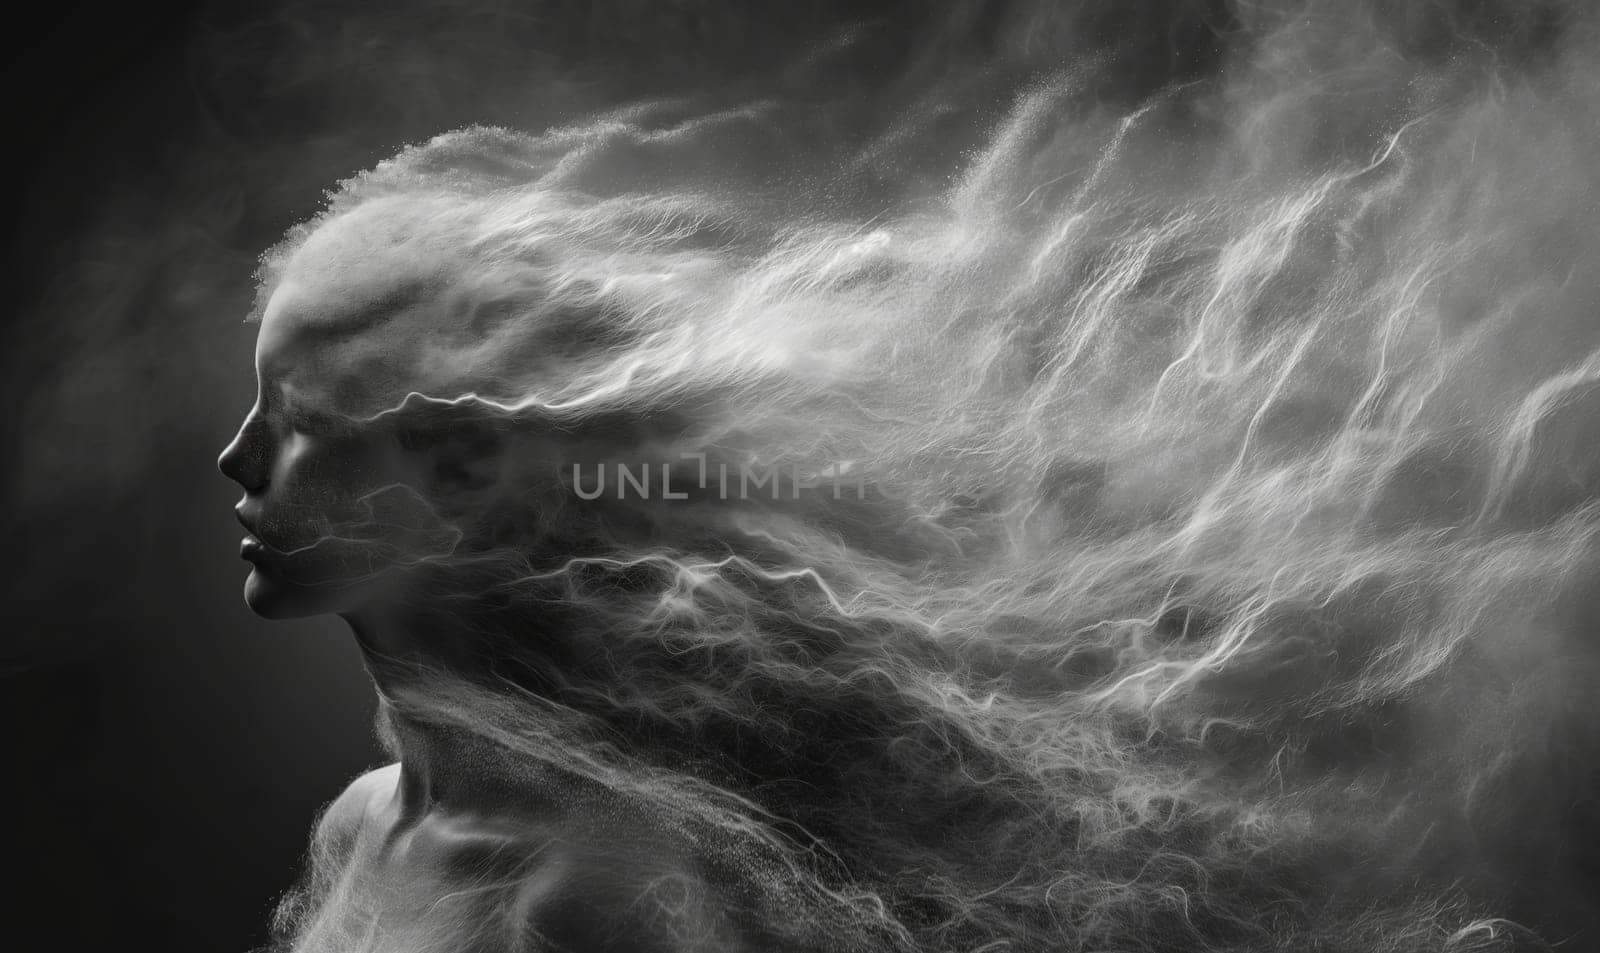 Abstract image of a woman with flowing hair, in monochrome image. by Fischeron